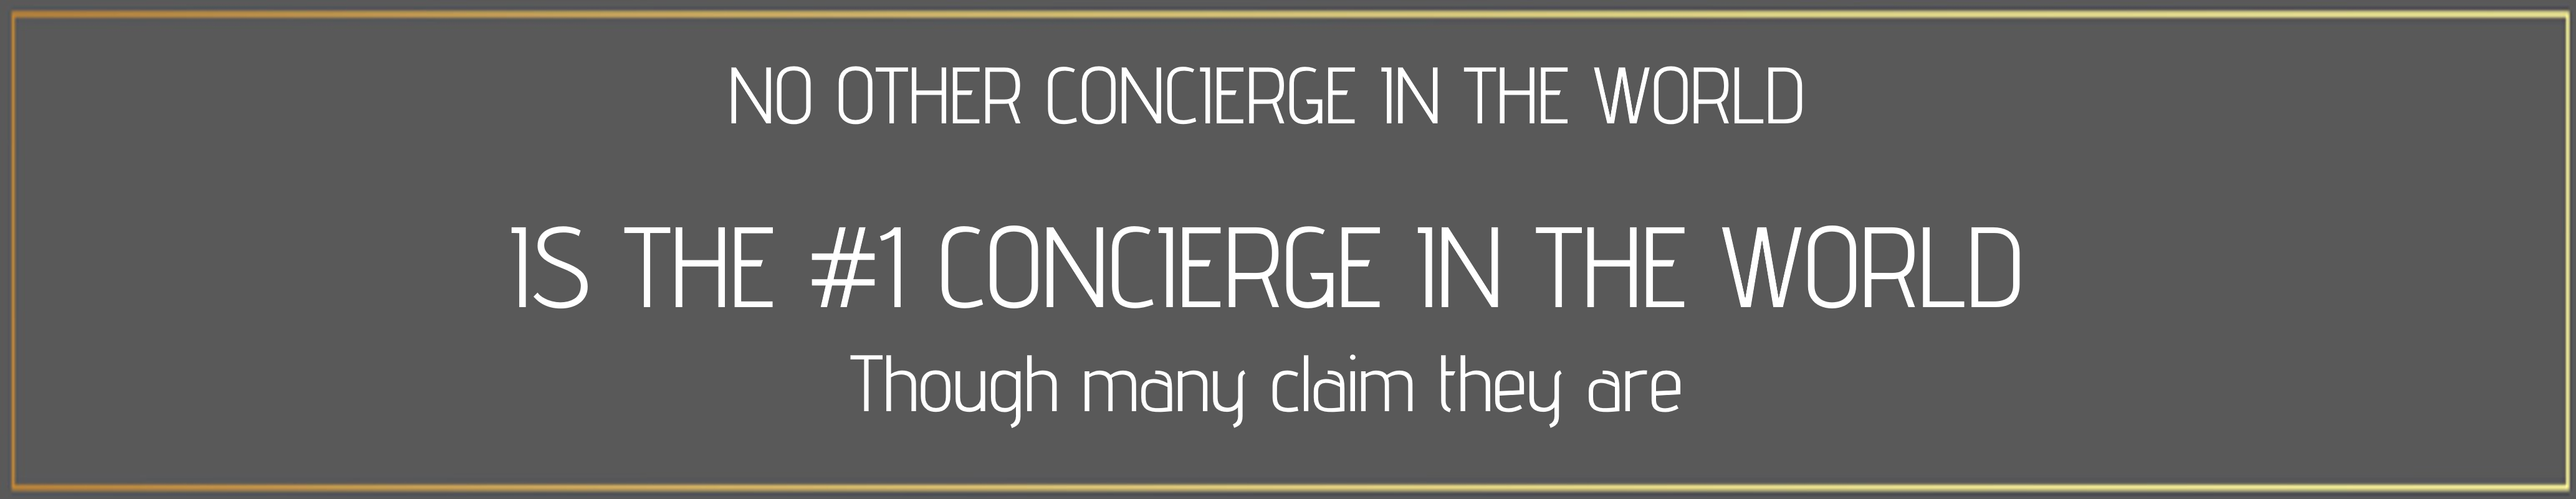 sincura are repeatedly voted the best concierge company in london and the world